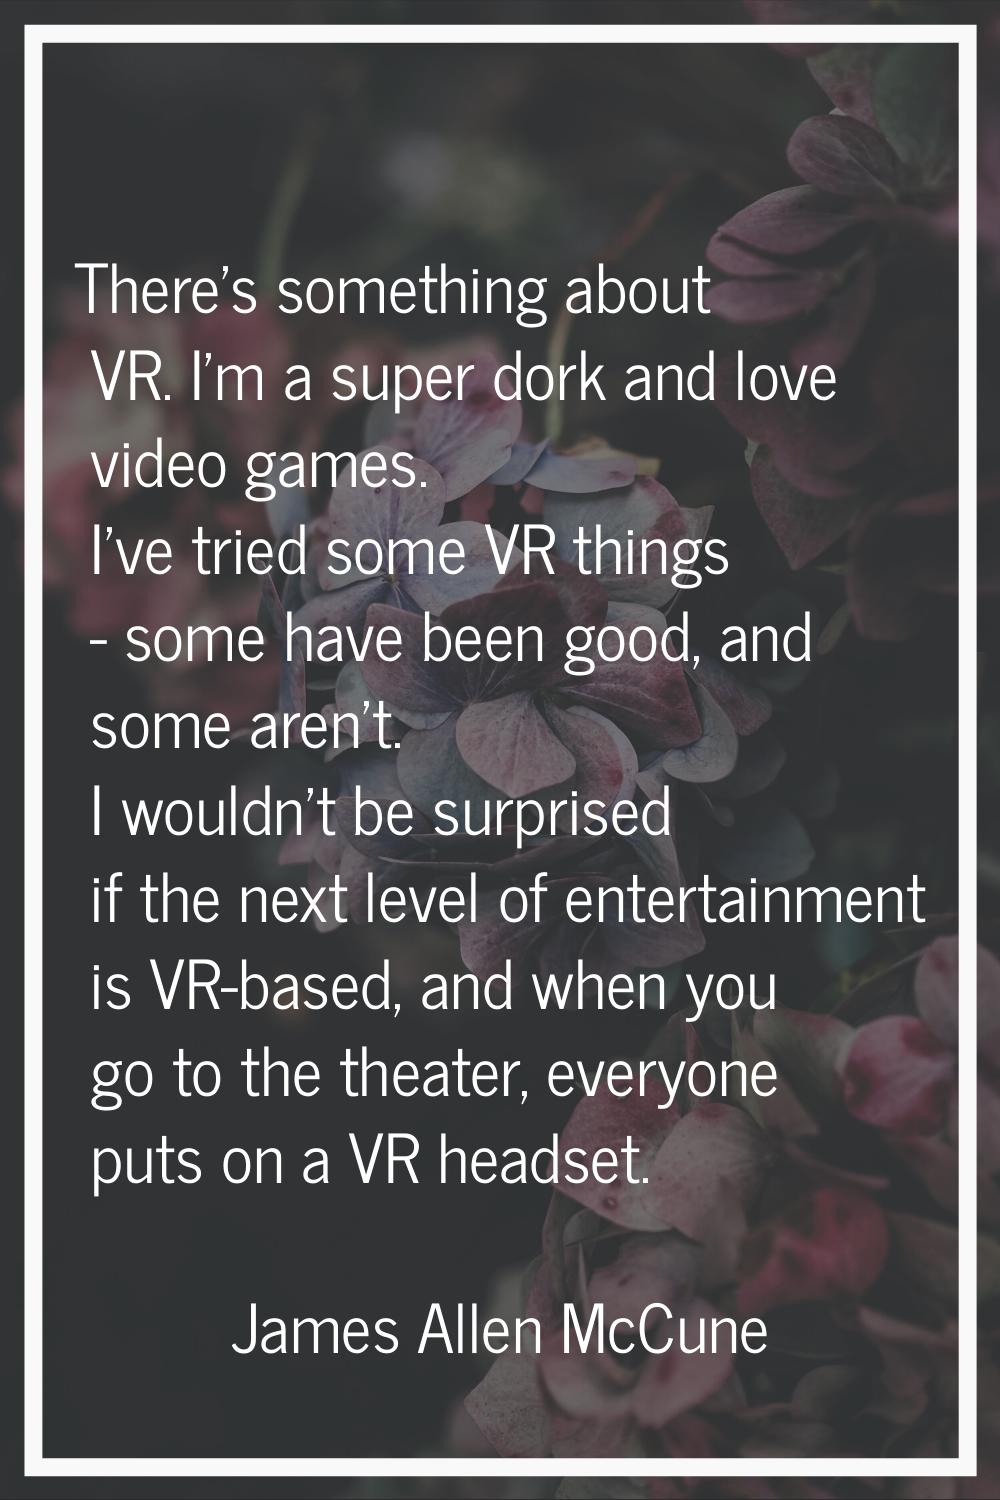 There's something about VR. I'm a super dork and love video games. I've tried some VR things - some